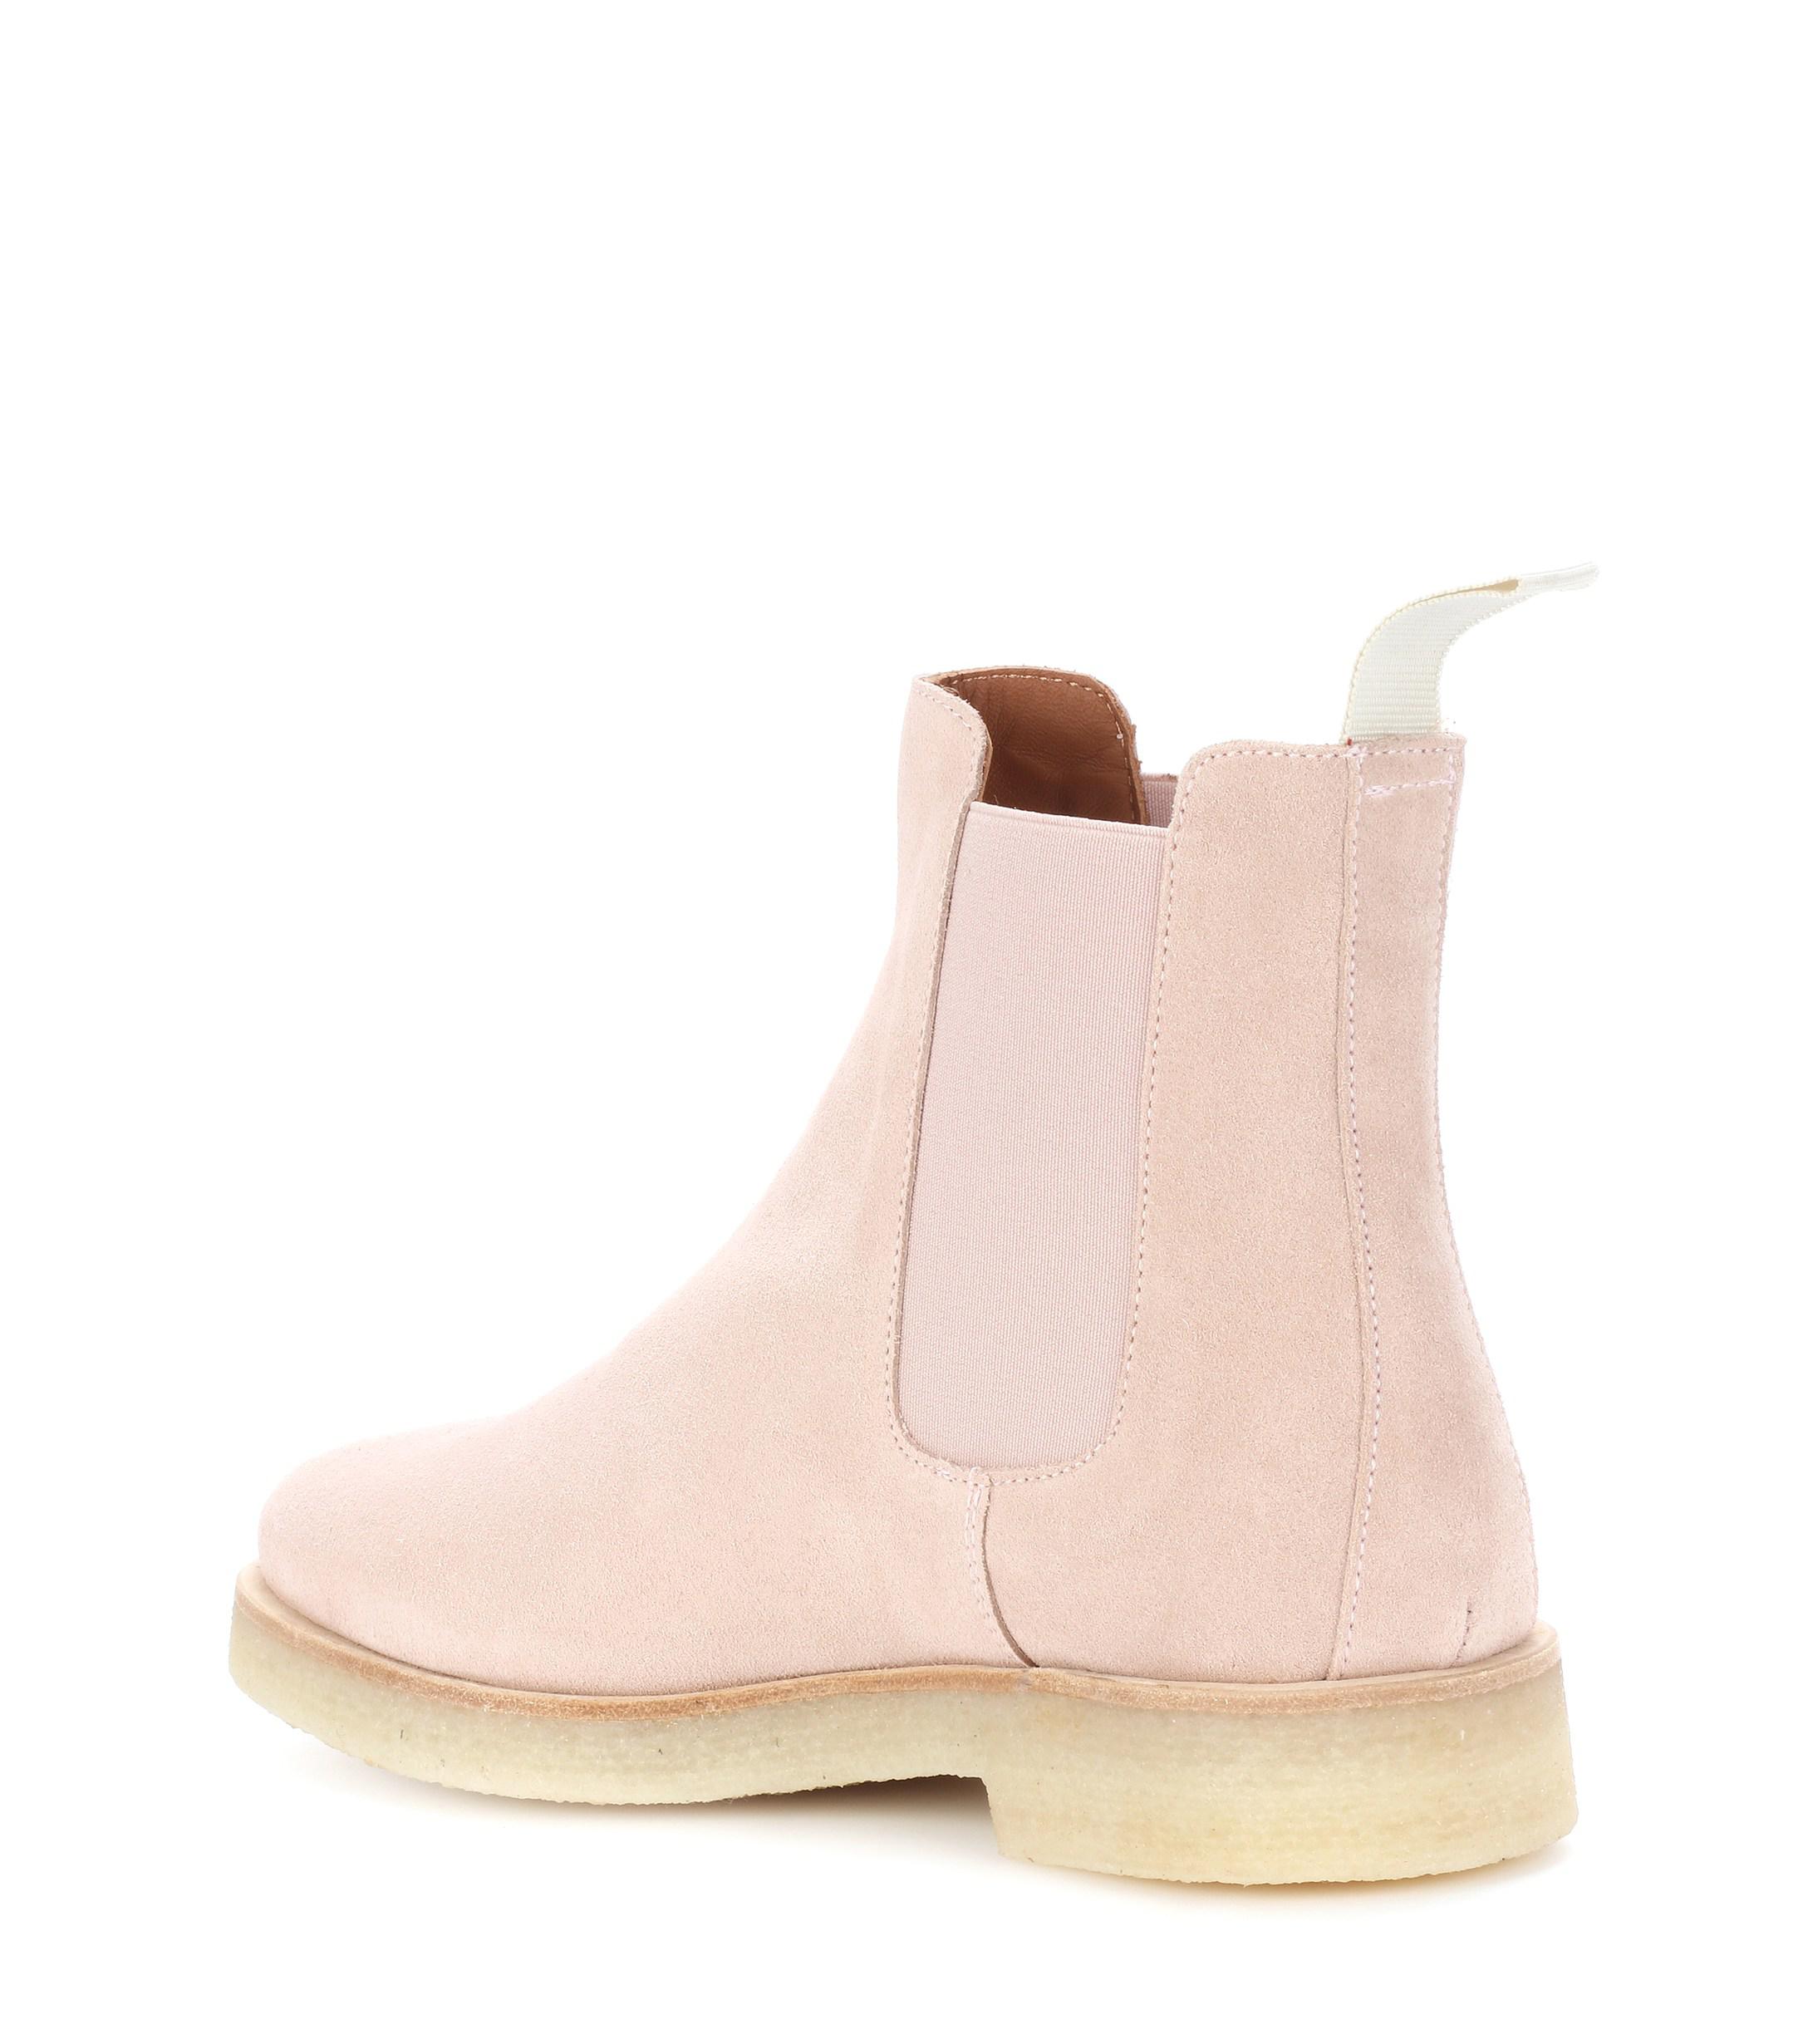 Common Projects Suede Chelsea Boots in Light Pink (Pink) - Lyst